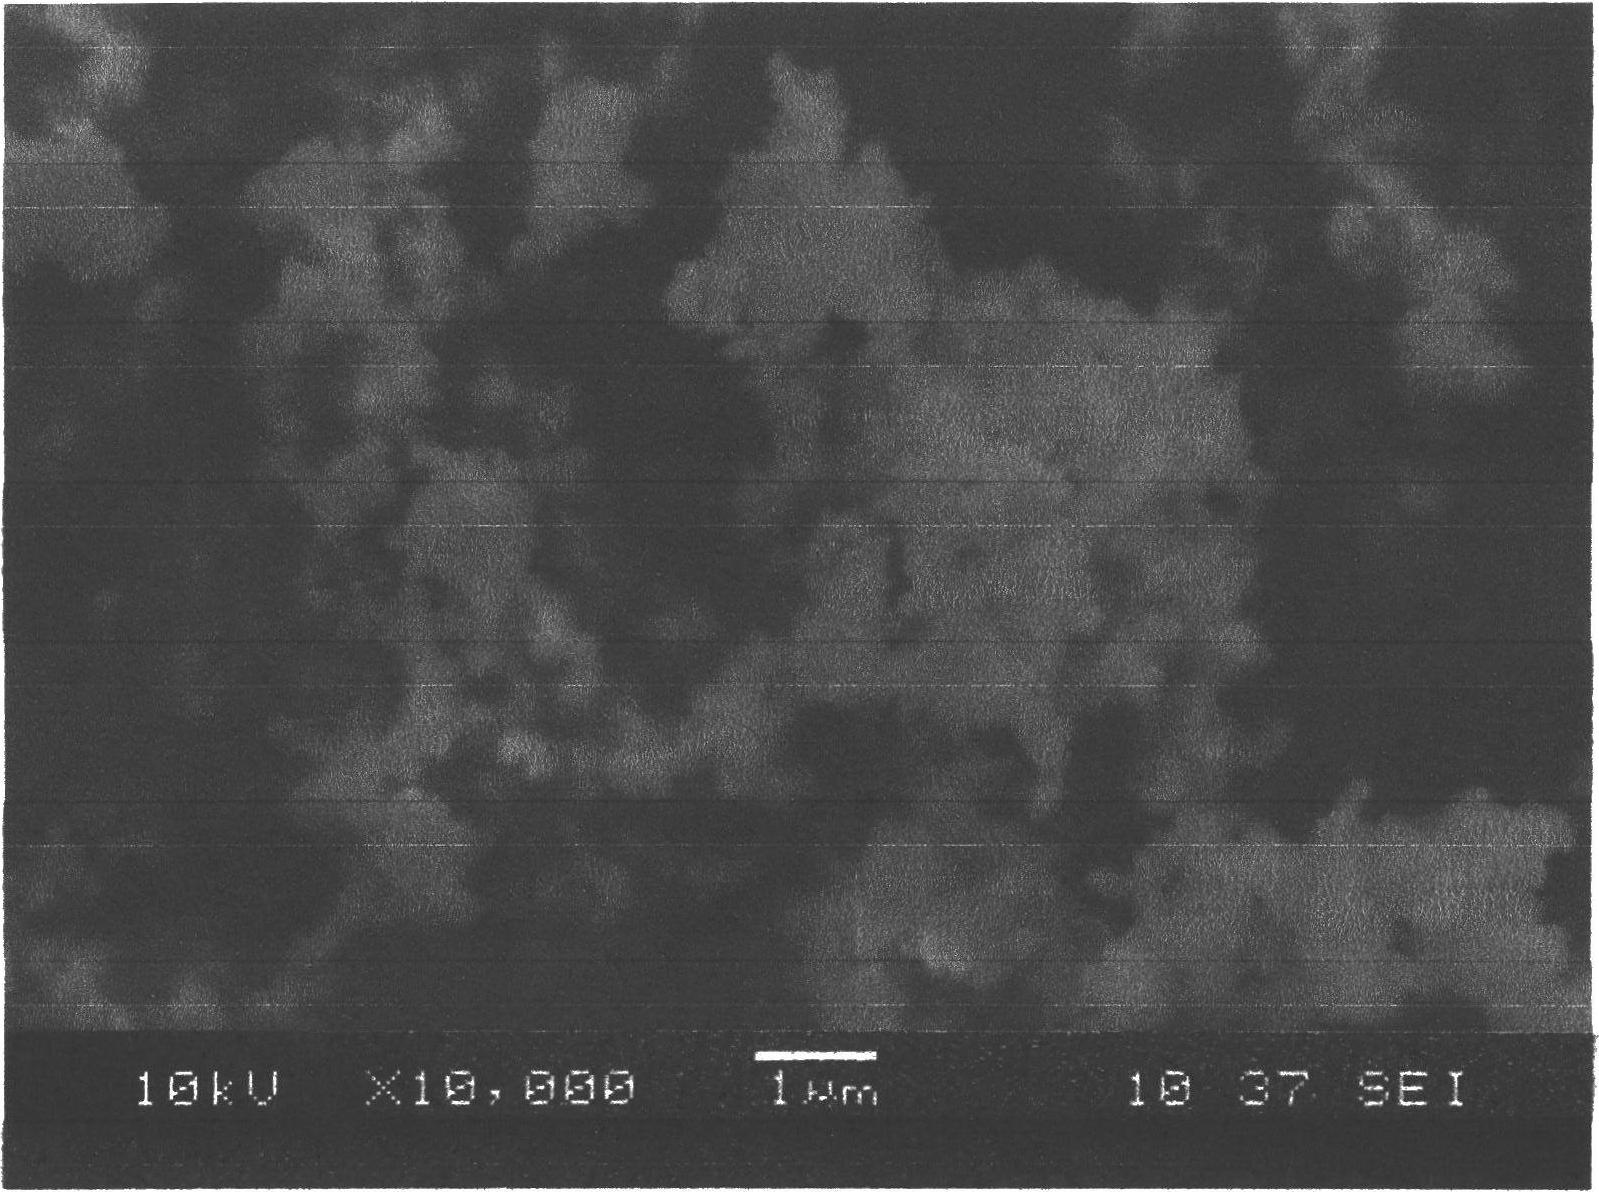 Method for preparing CZTS (Copper Zinc Tin Sulfide) (Se) series nanometer powder by low-temperature mechanical alloying